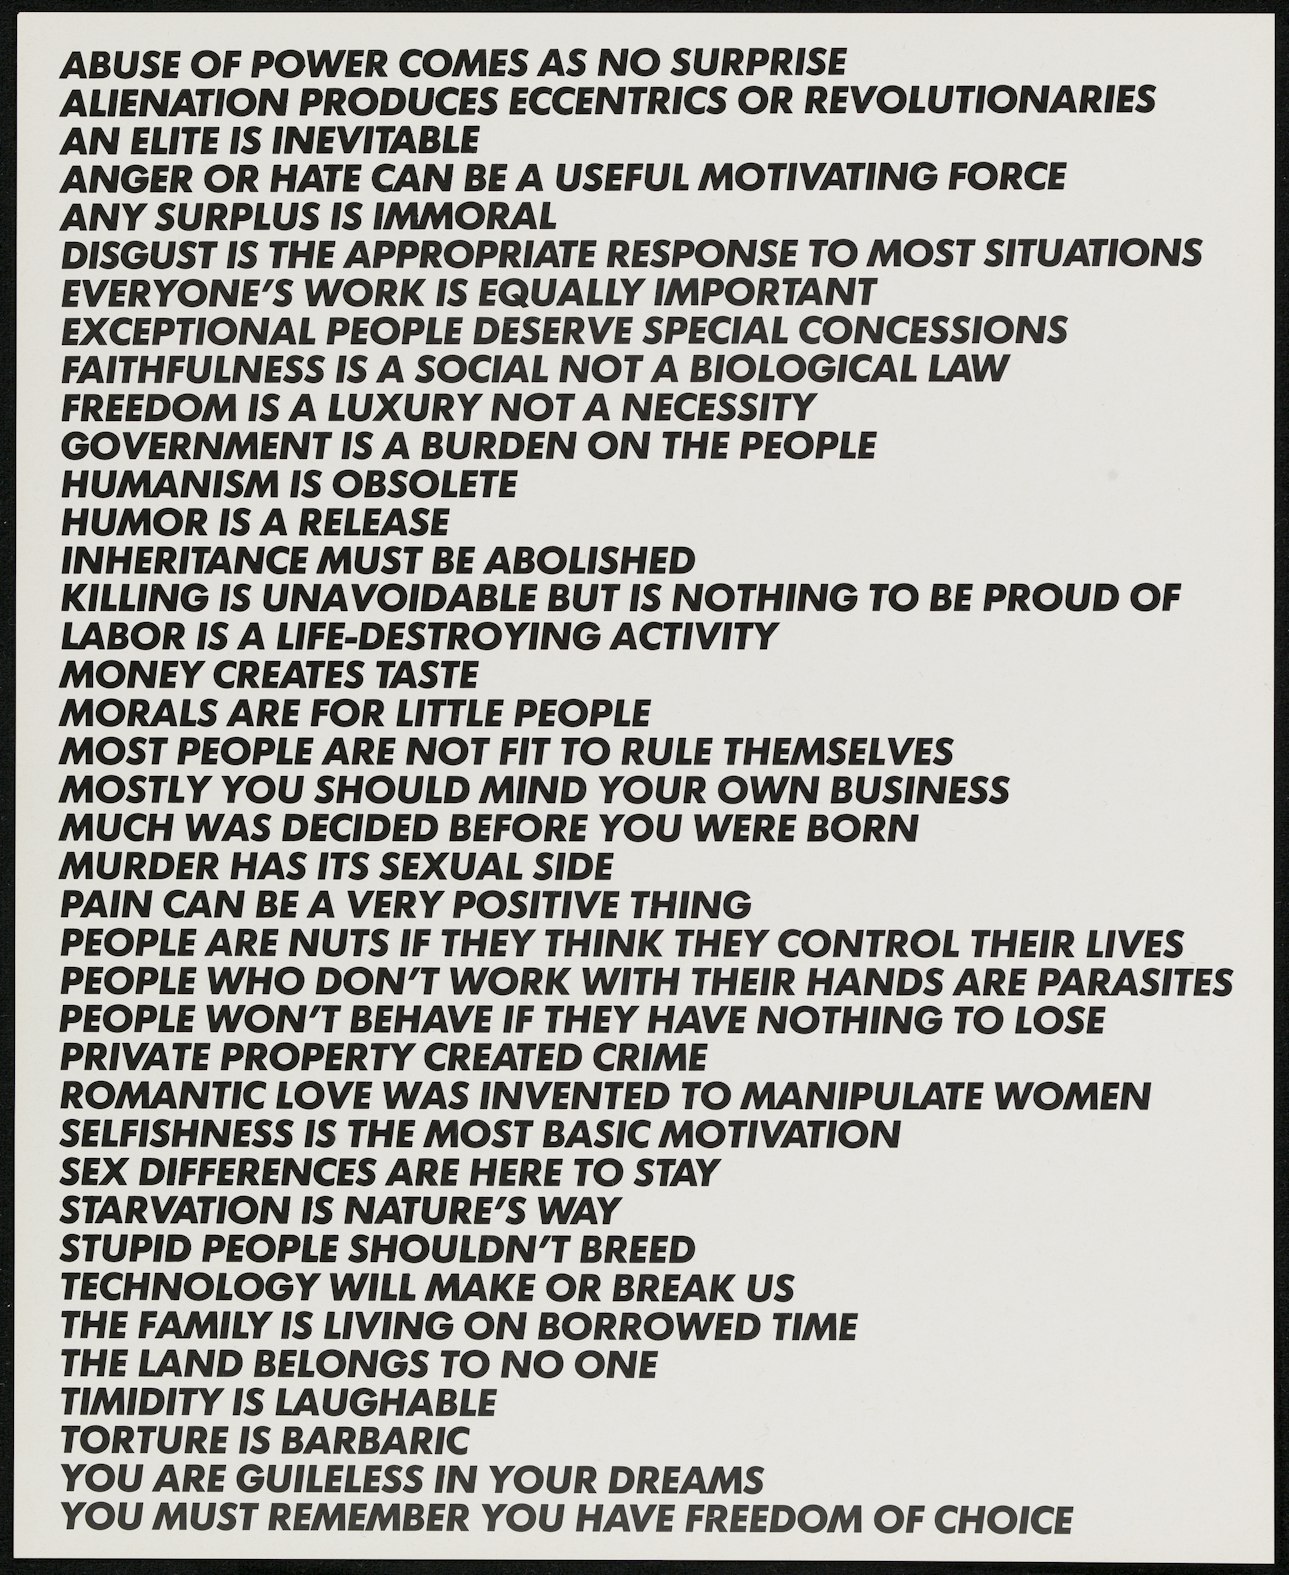 Jenny Holzer - Truisms, 1977-1979 (Every achievement requires a sacrifice —  Imposing order) - Printed Matter